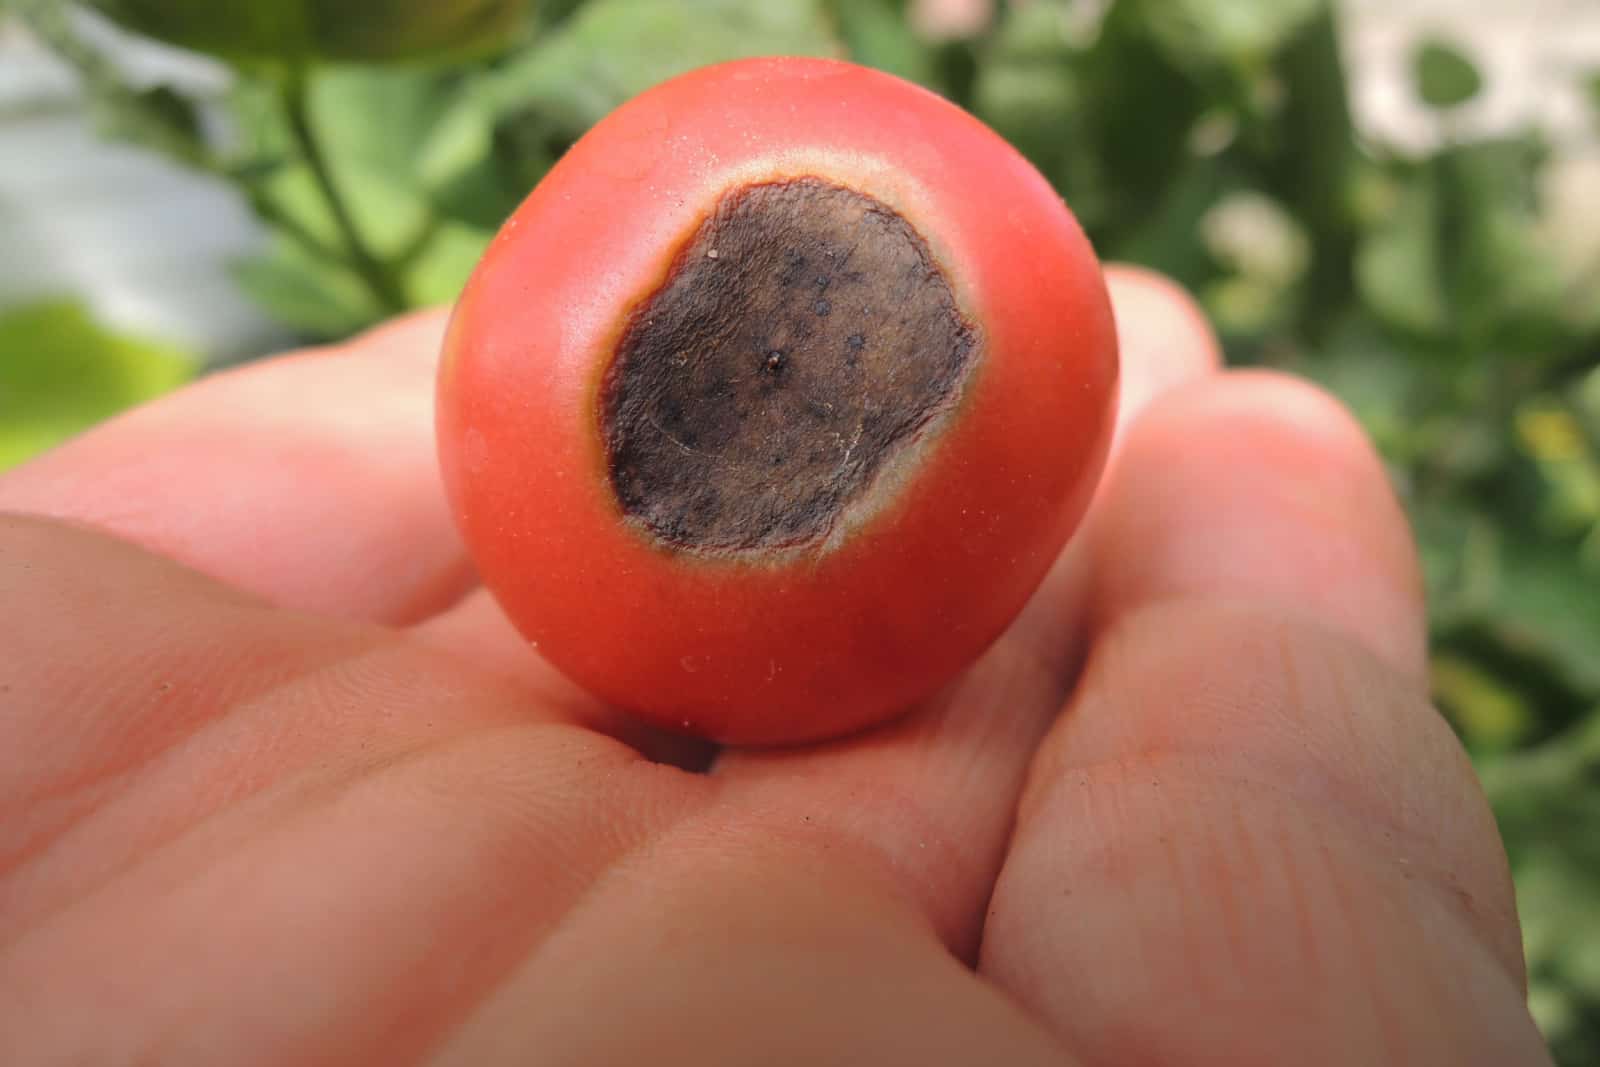 A water-soaked spot at the blossom end of tomato fruits is the classic symptom of blossom-end rot.